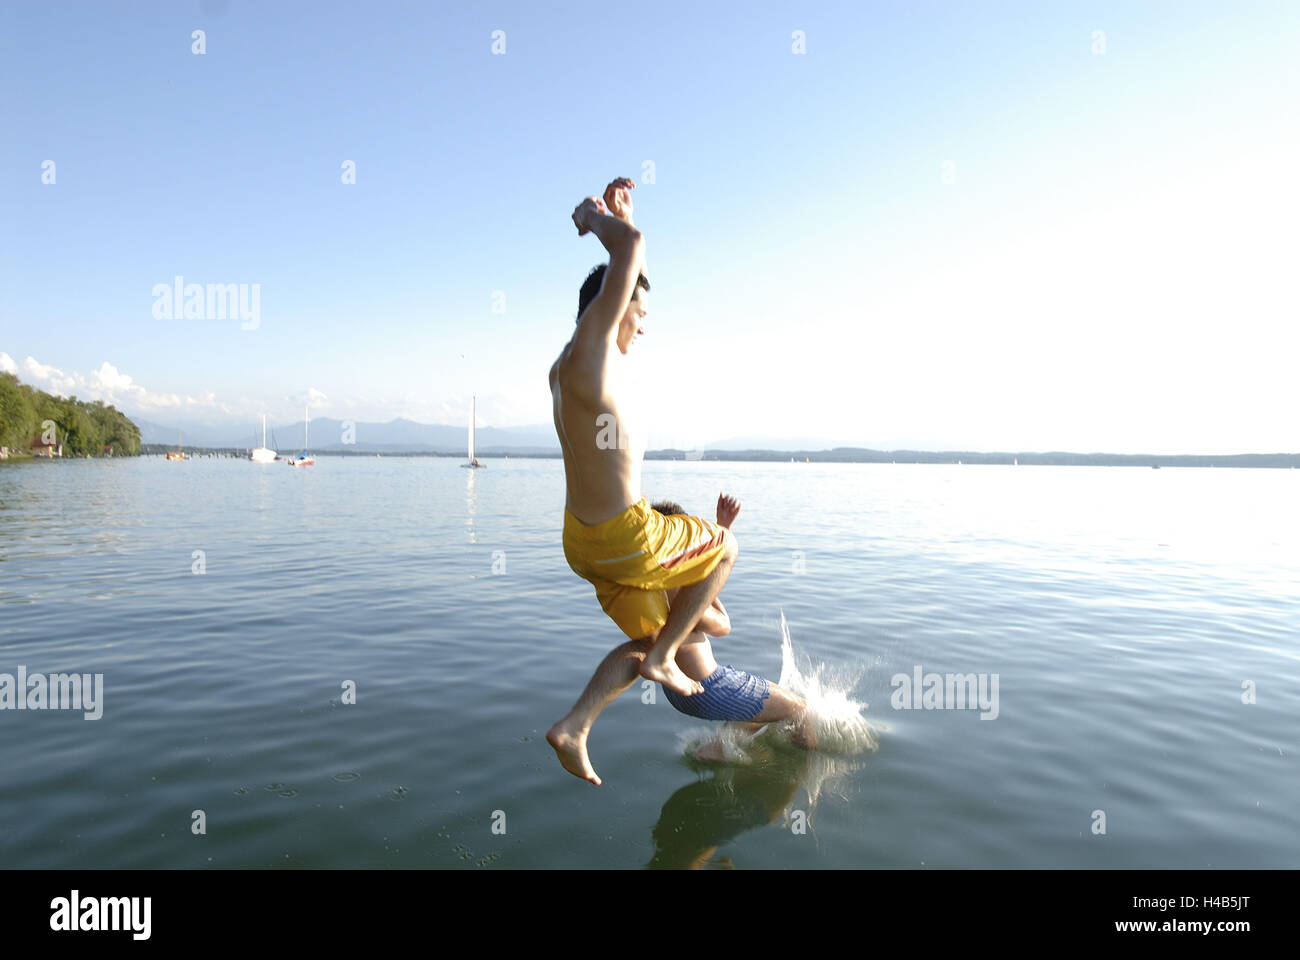 Men, two, young, lake, jump, Stock Photo